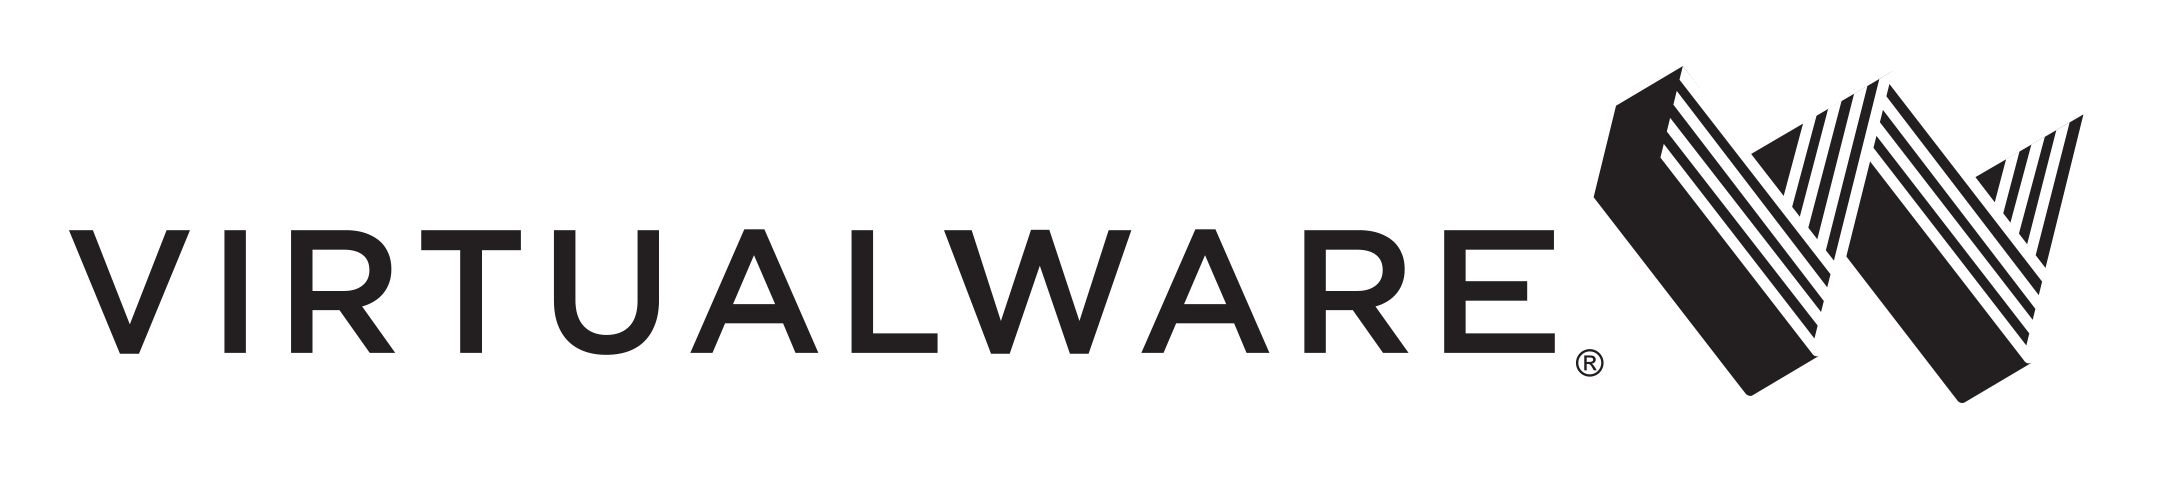 INVESTOR CALL: Virtualware’s CEO to present Annual Report to shareholders